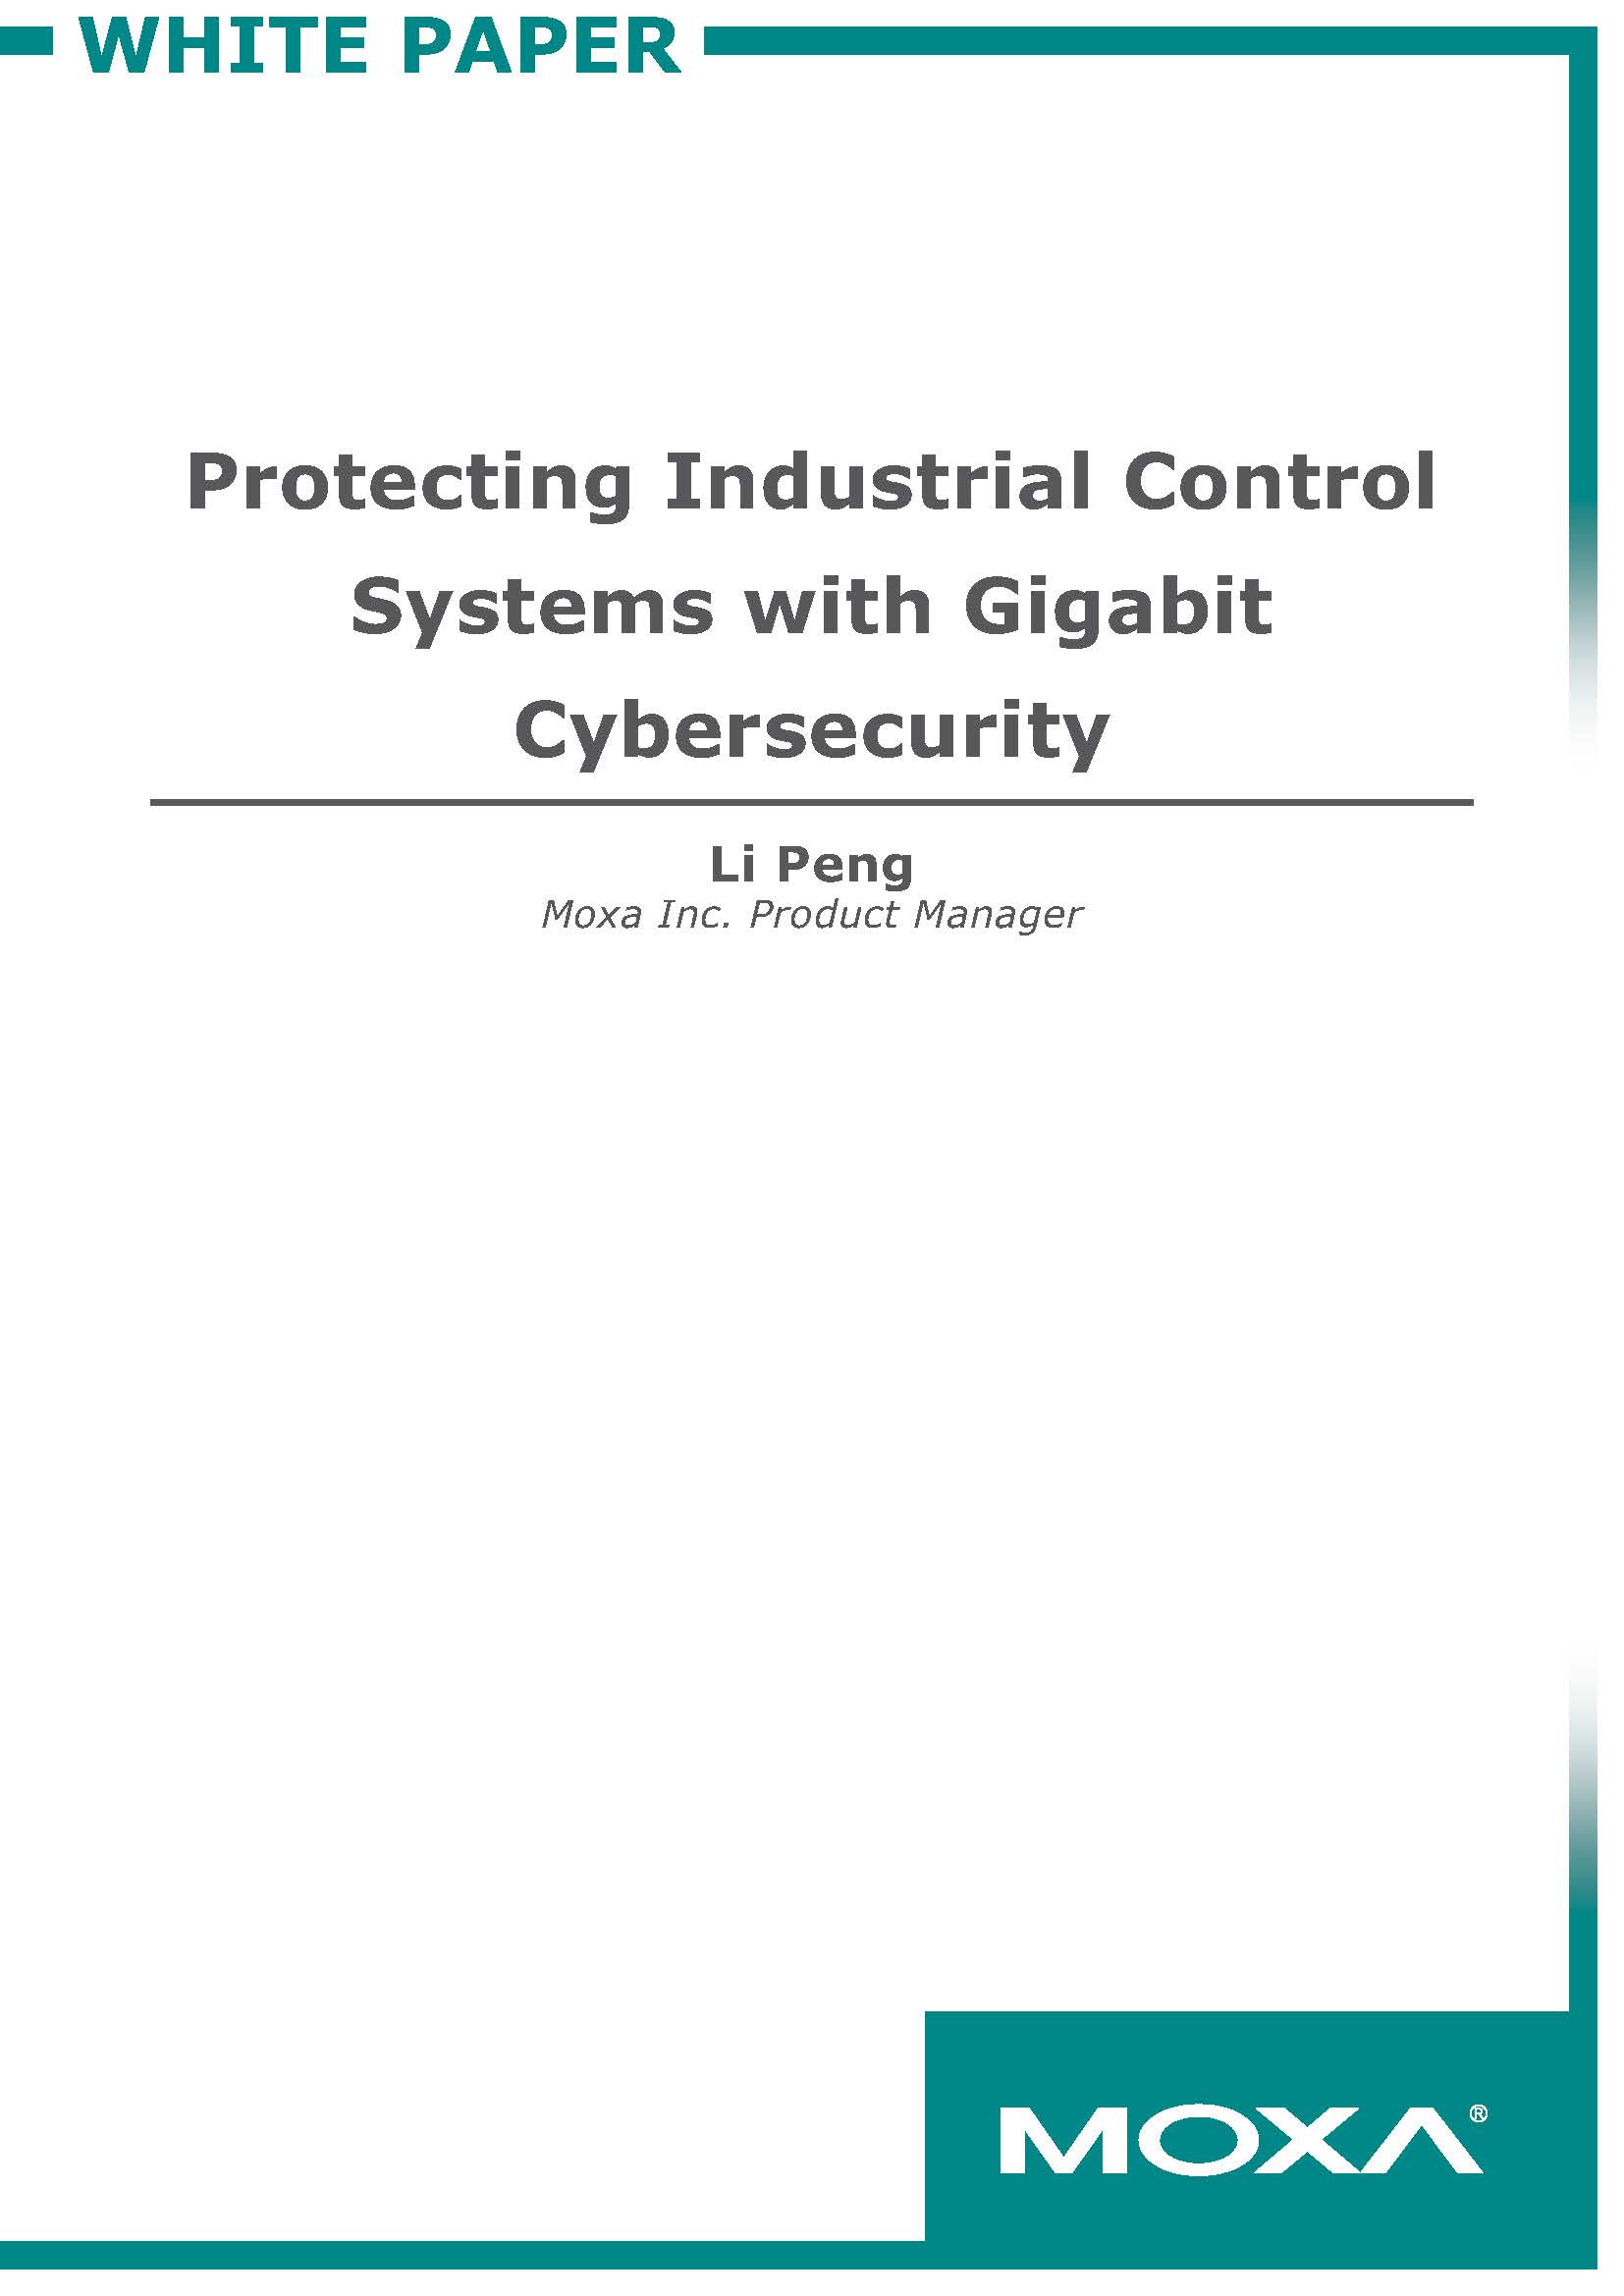 Moxa_White_Paper---Protecting_Industrial_Control_Systems_with_Gigabit_Cybersecurity_Page_1.jpg